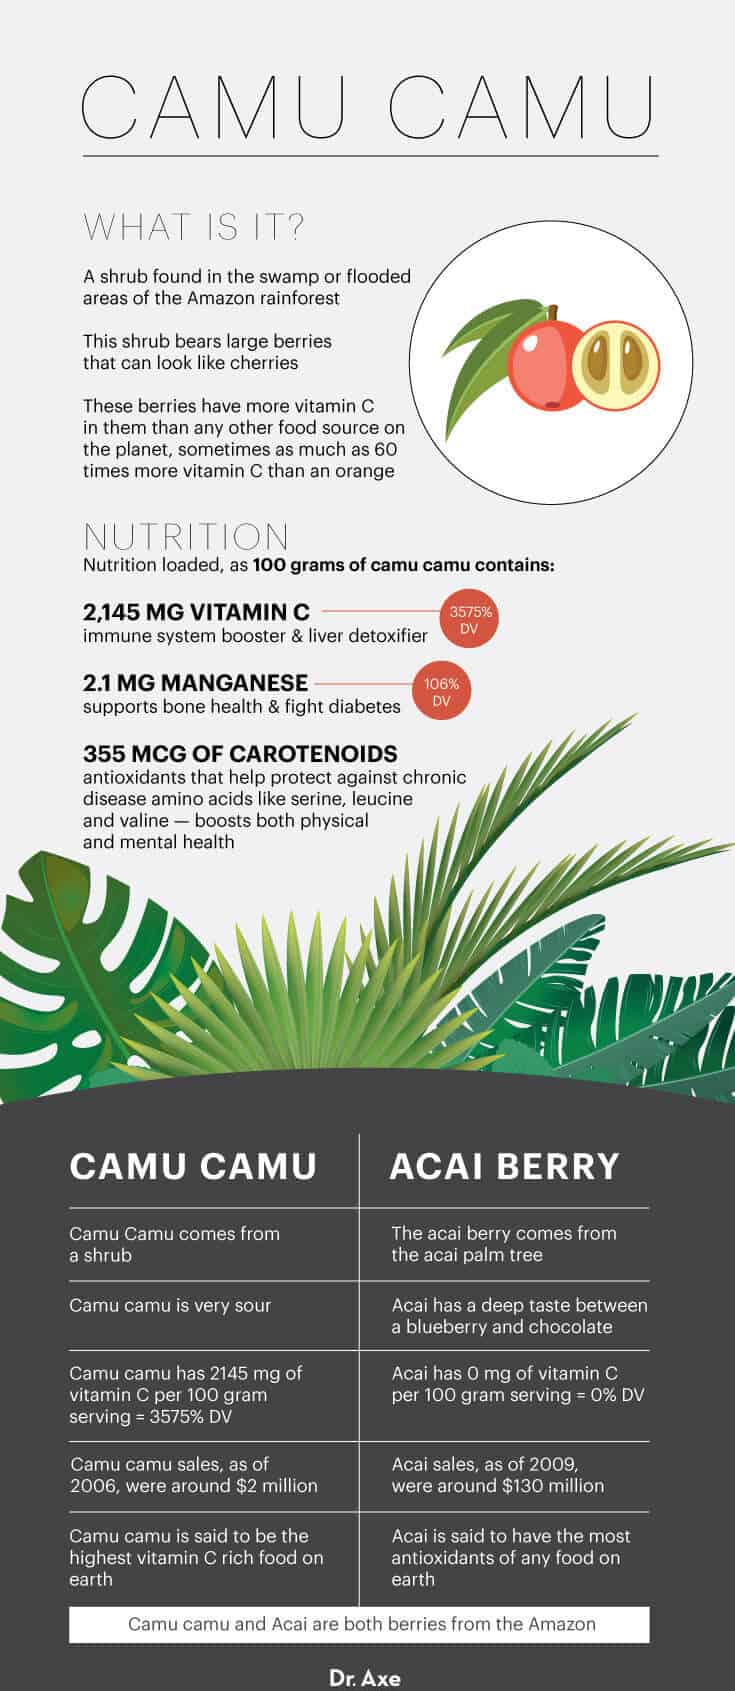 What is camu camu? - Dr. Axe